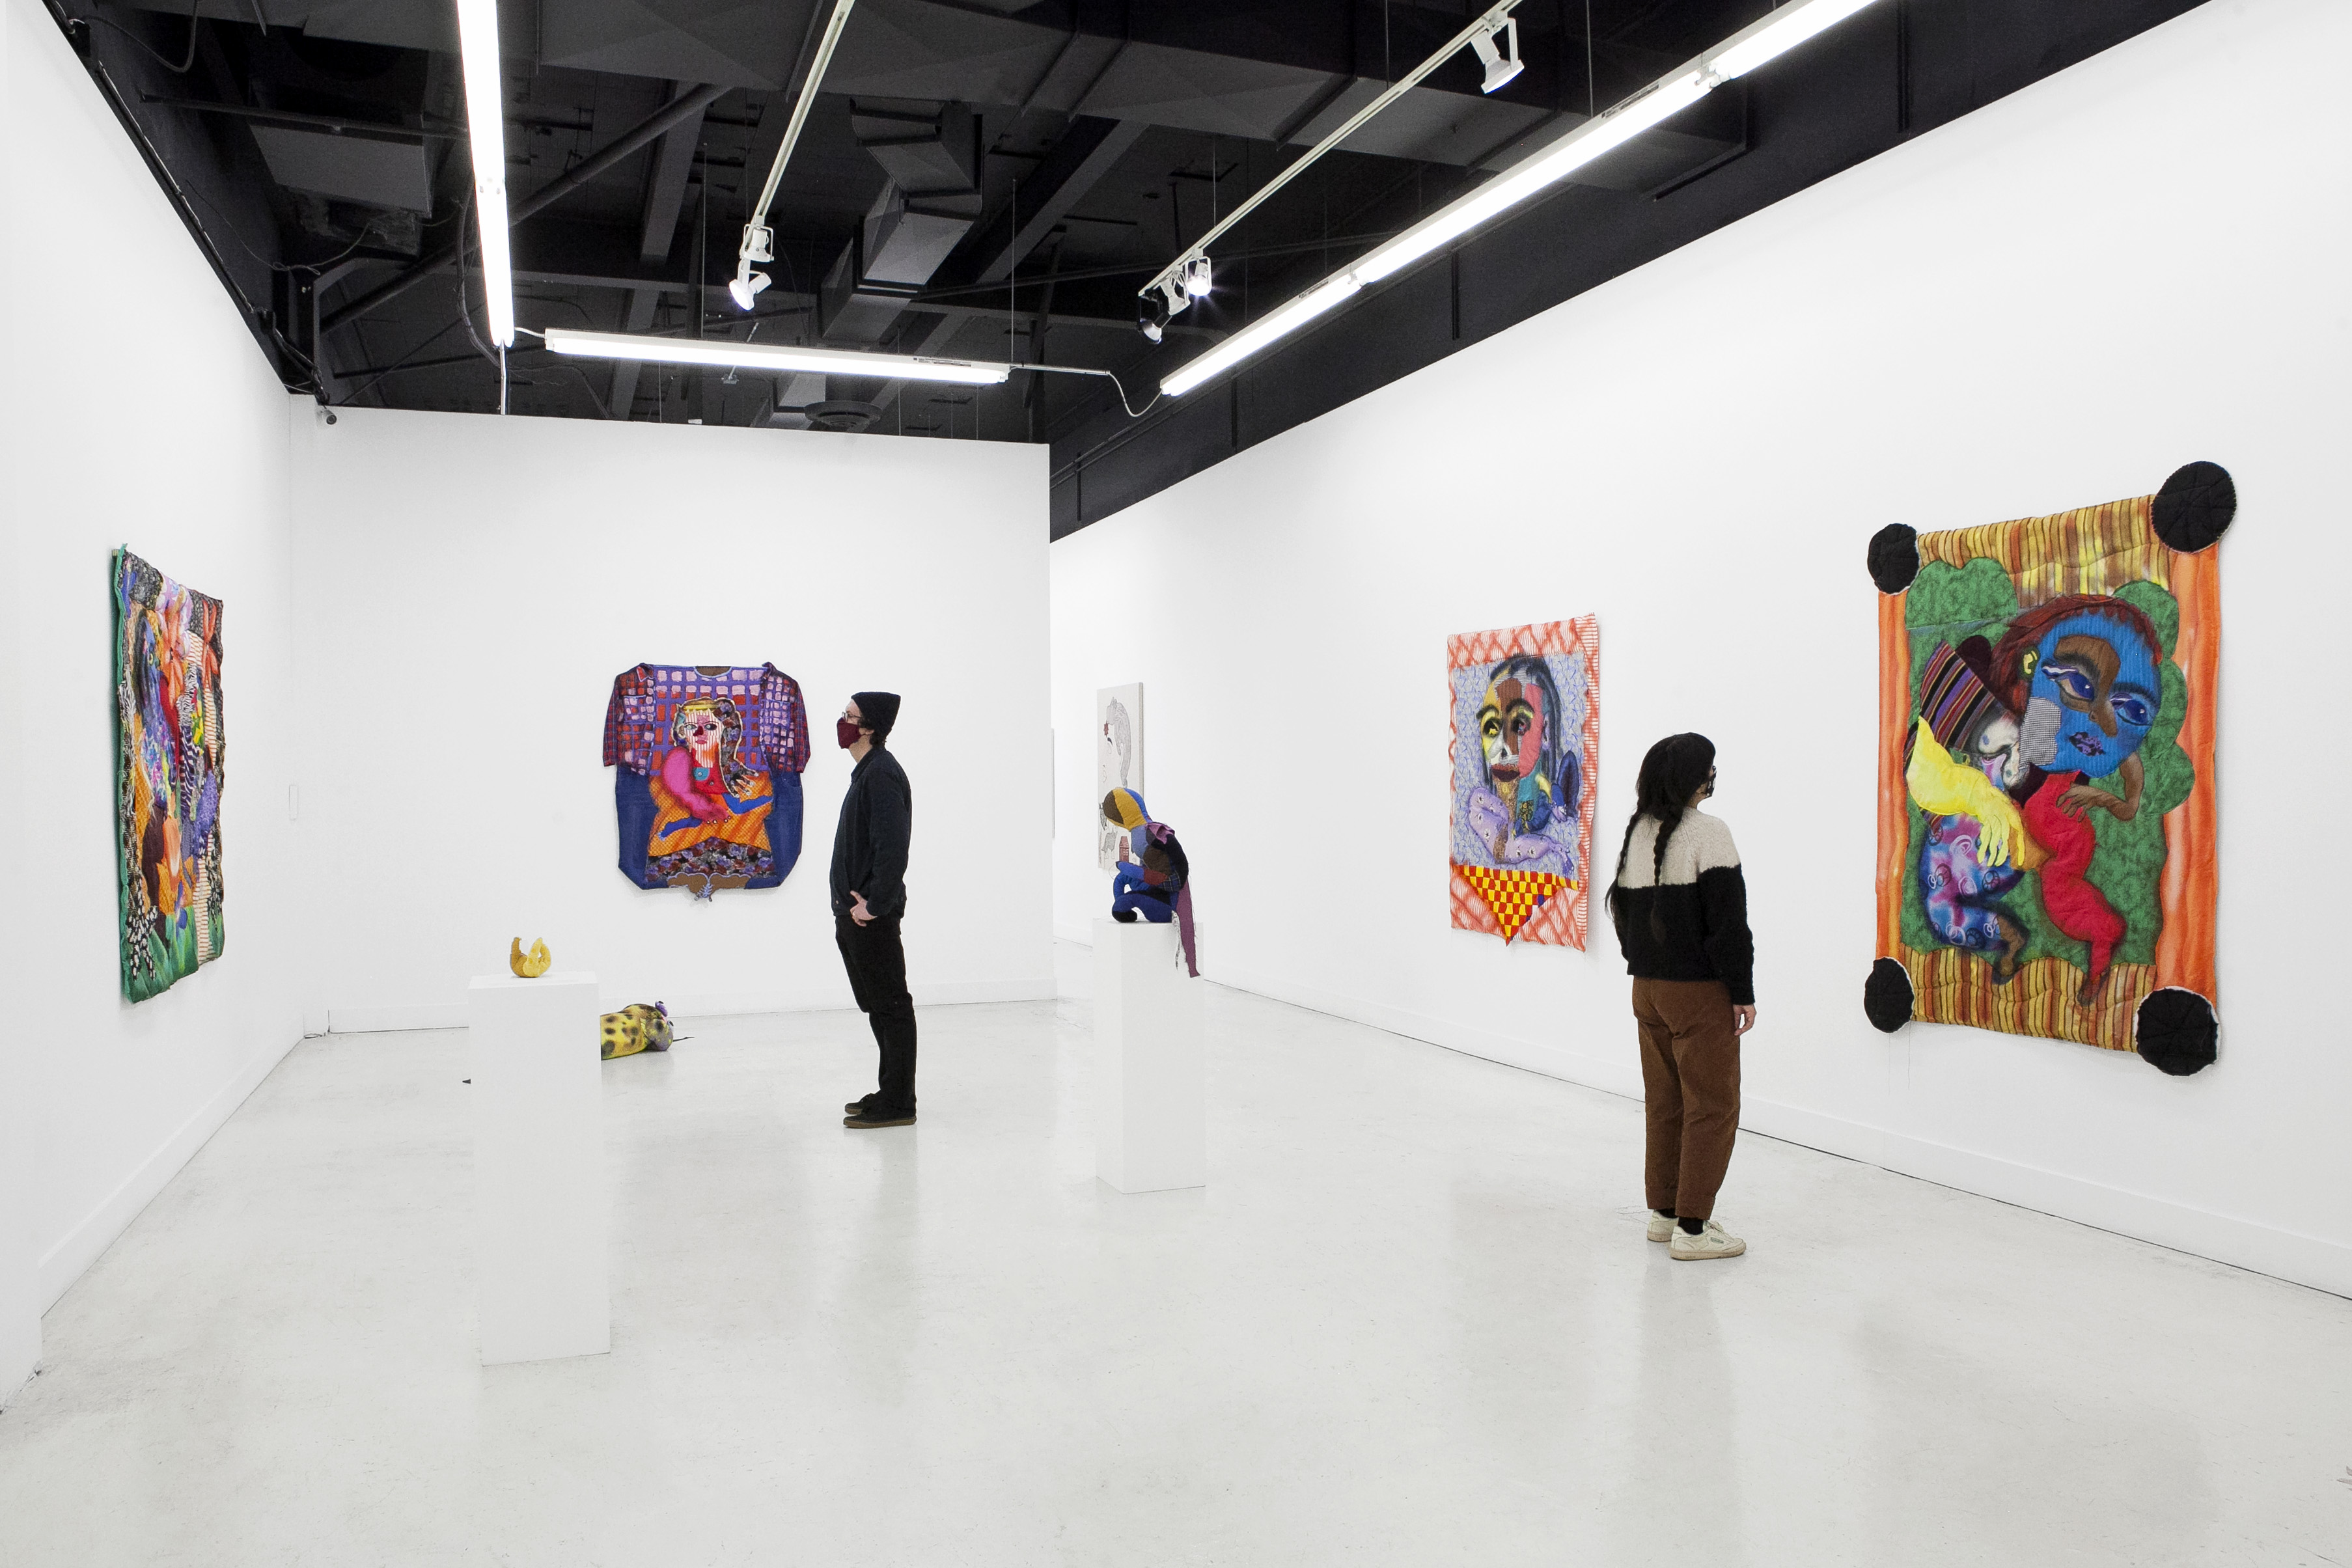 Two people standing in pt. 2 Gallery looking large colorful paintings.